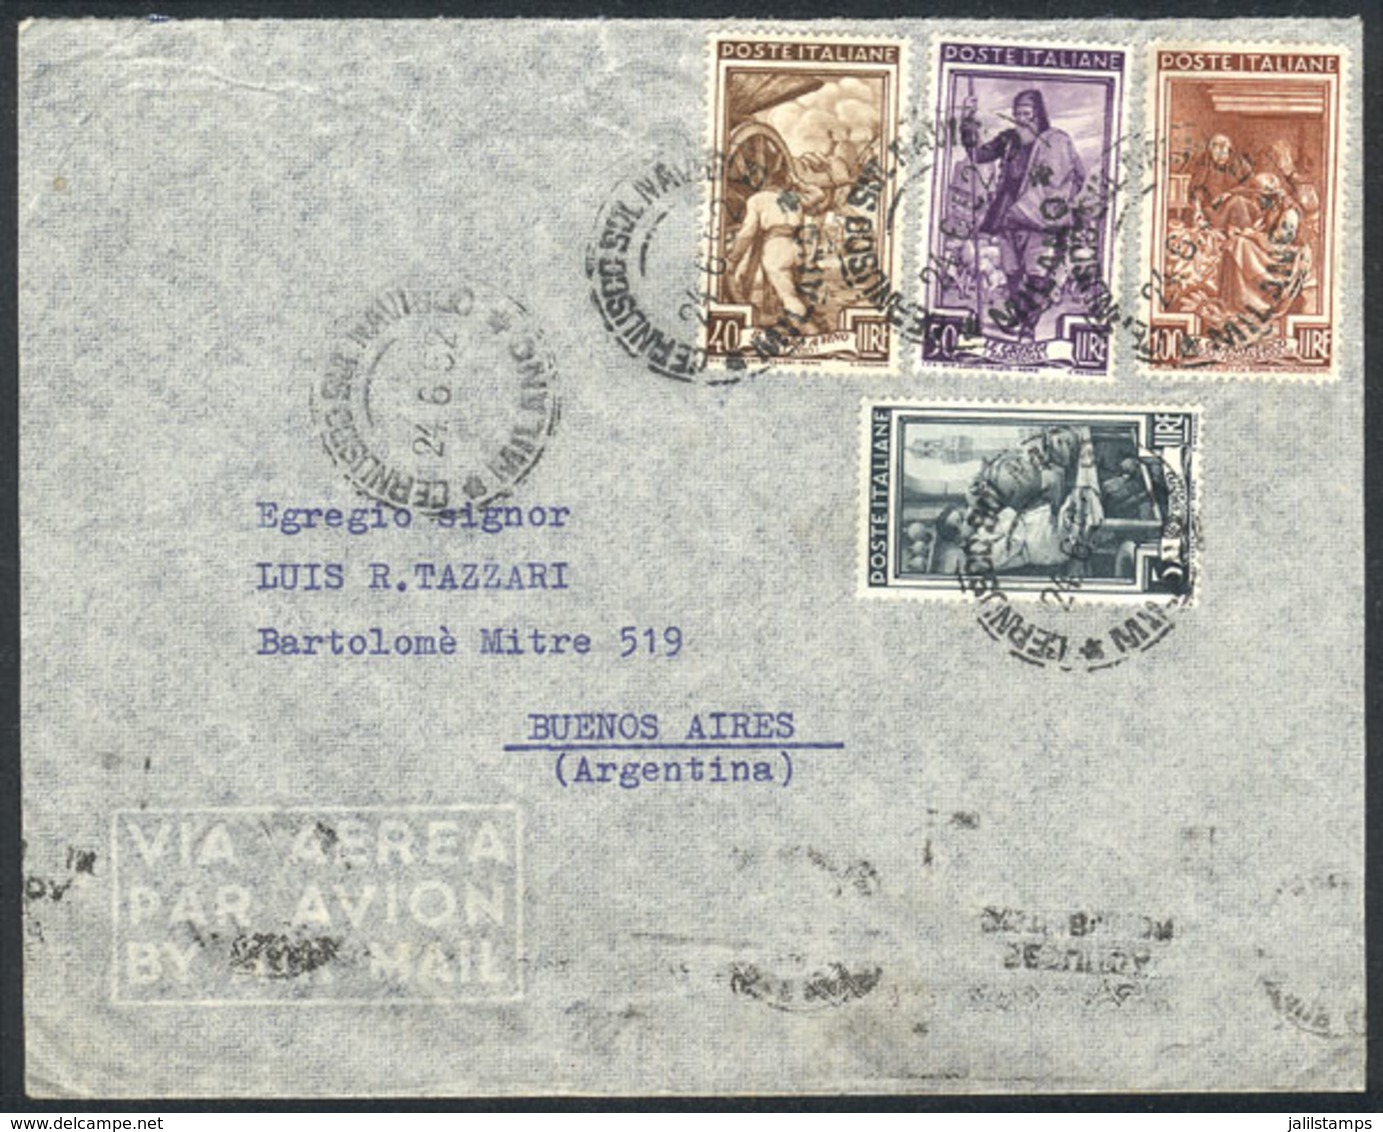 ITALY: Cover Franked By Sa.651 + Other Values (total 195L.), Sent From Cernusco To Argentina On 24/JUN/1952, Very Fine Q - Unclassified